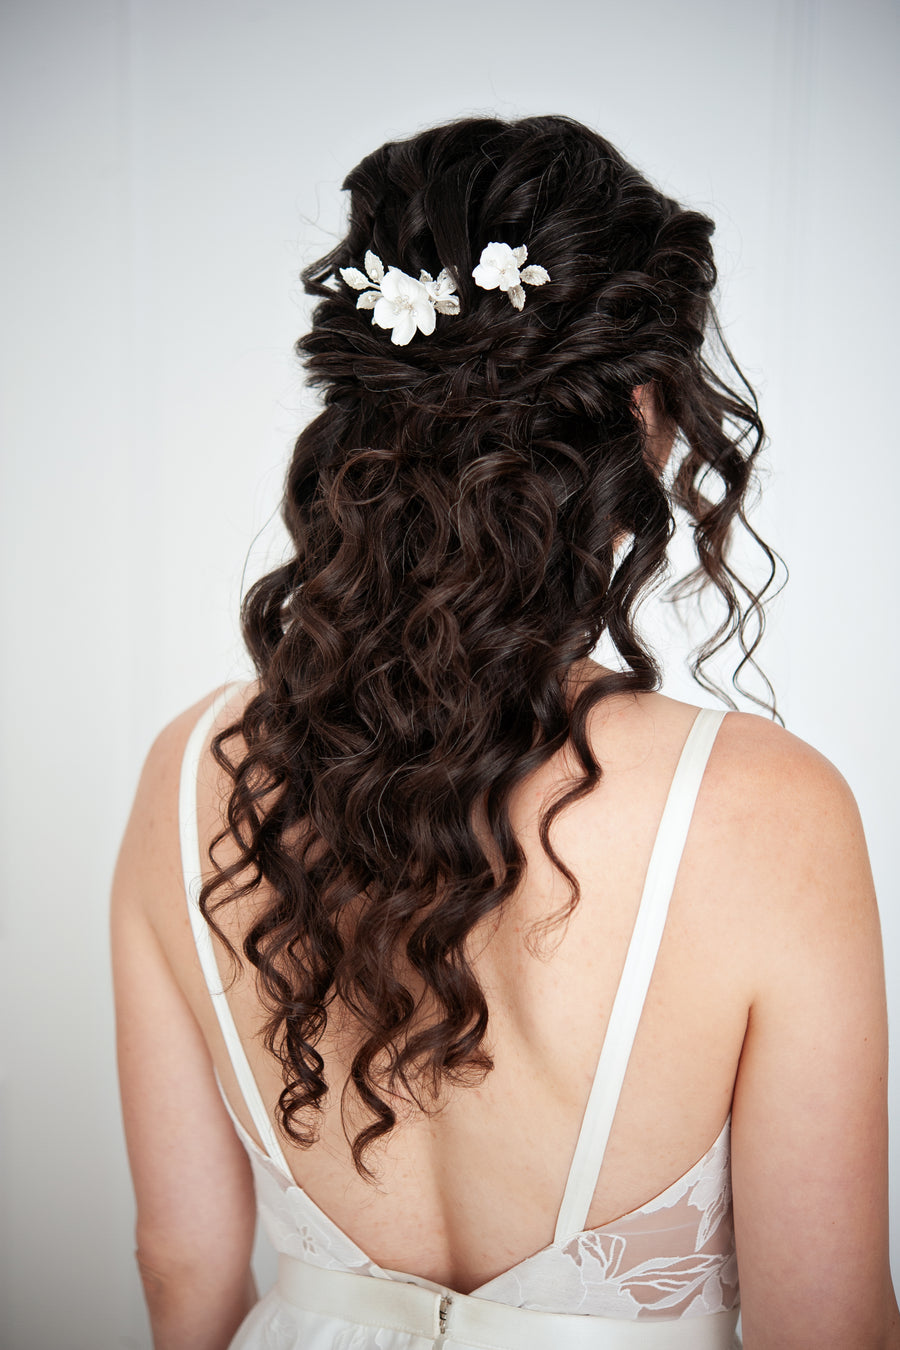 Bride with long half up half down hairstyle wearing silver bridal pins.